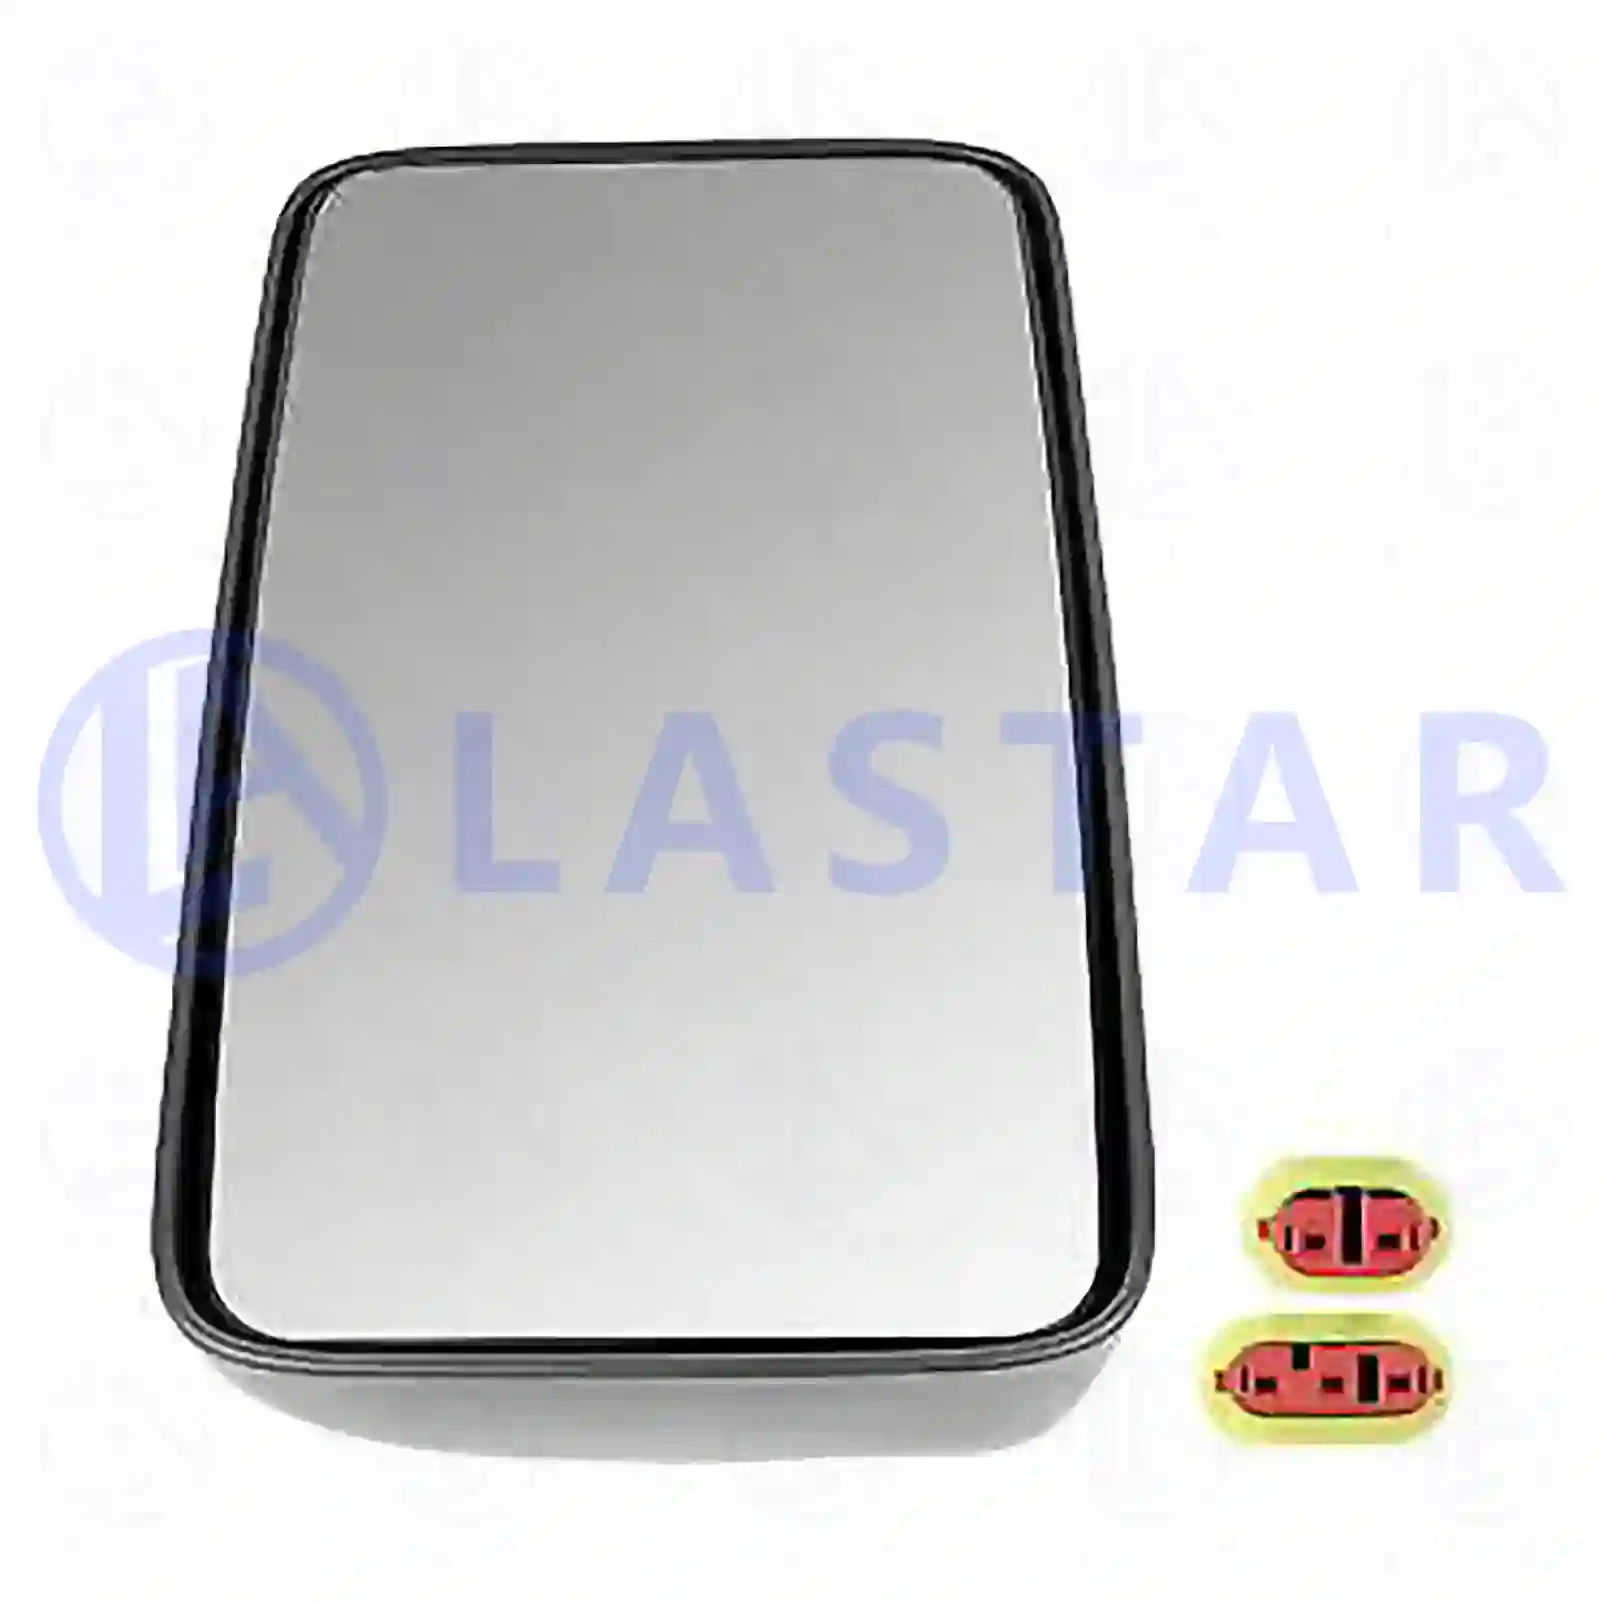 Main mirror, heated, electrical, 77720146, 2997160, 98472979 ||  77720146 Lastar Spare Part | Truck Spare Parts, Auotomotive Spare Parts Main mirror, heated, electrical, 77720146, 2997160, 98472979 ||  77720146 Lastar Spare Part | Truck Spare Parts, Auotomotive Spare Parts